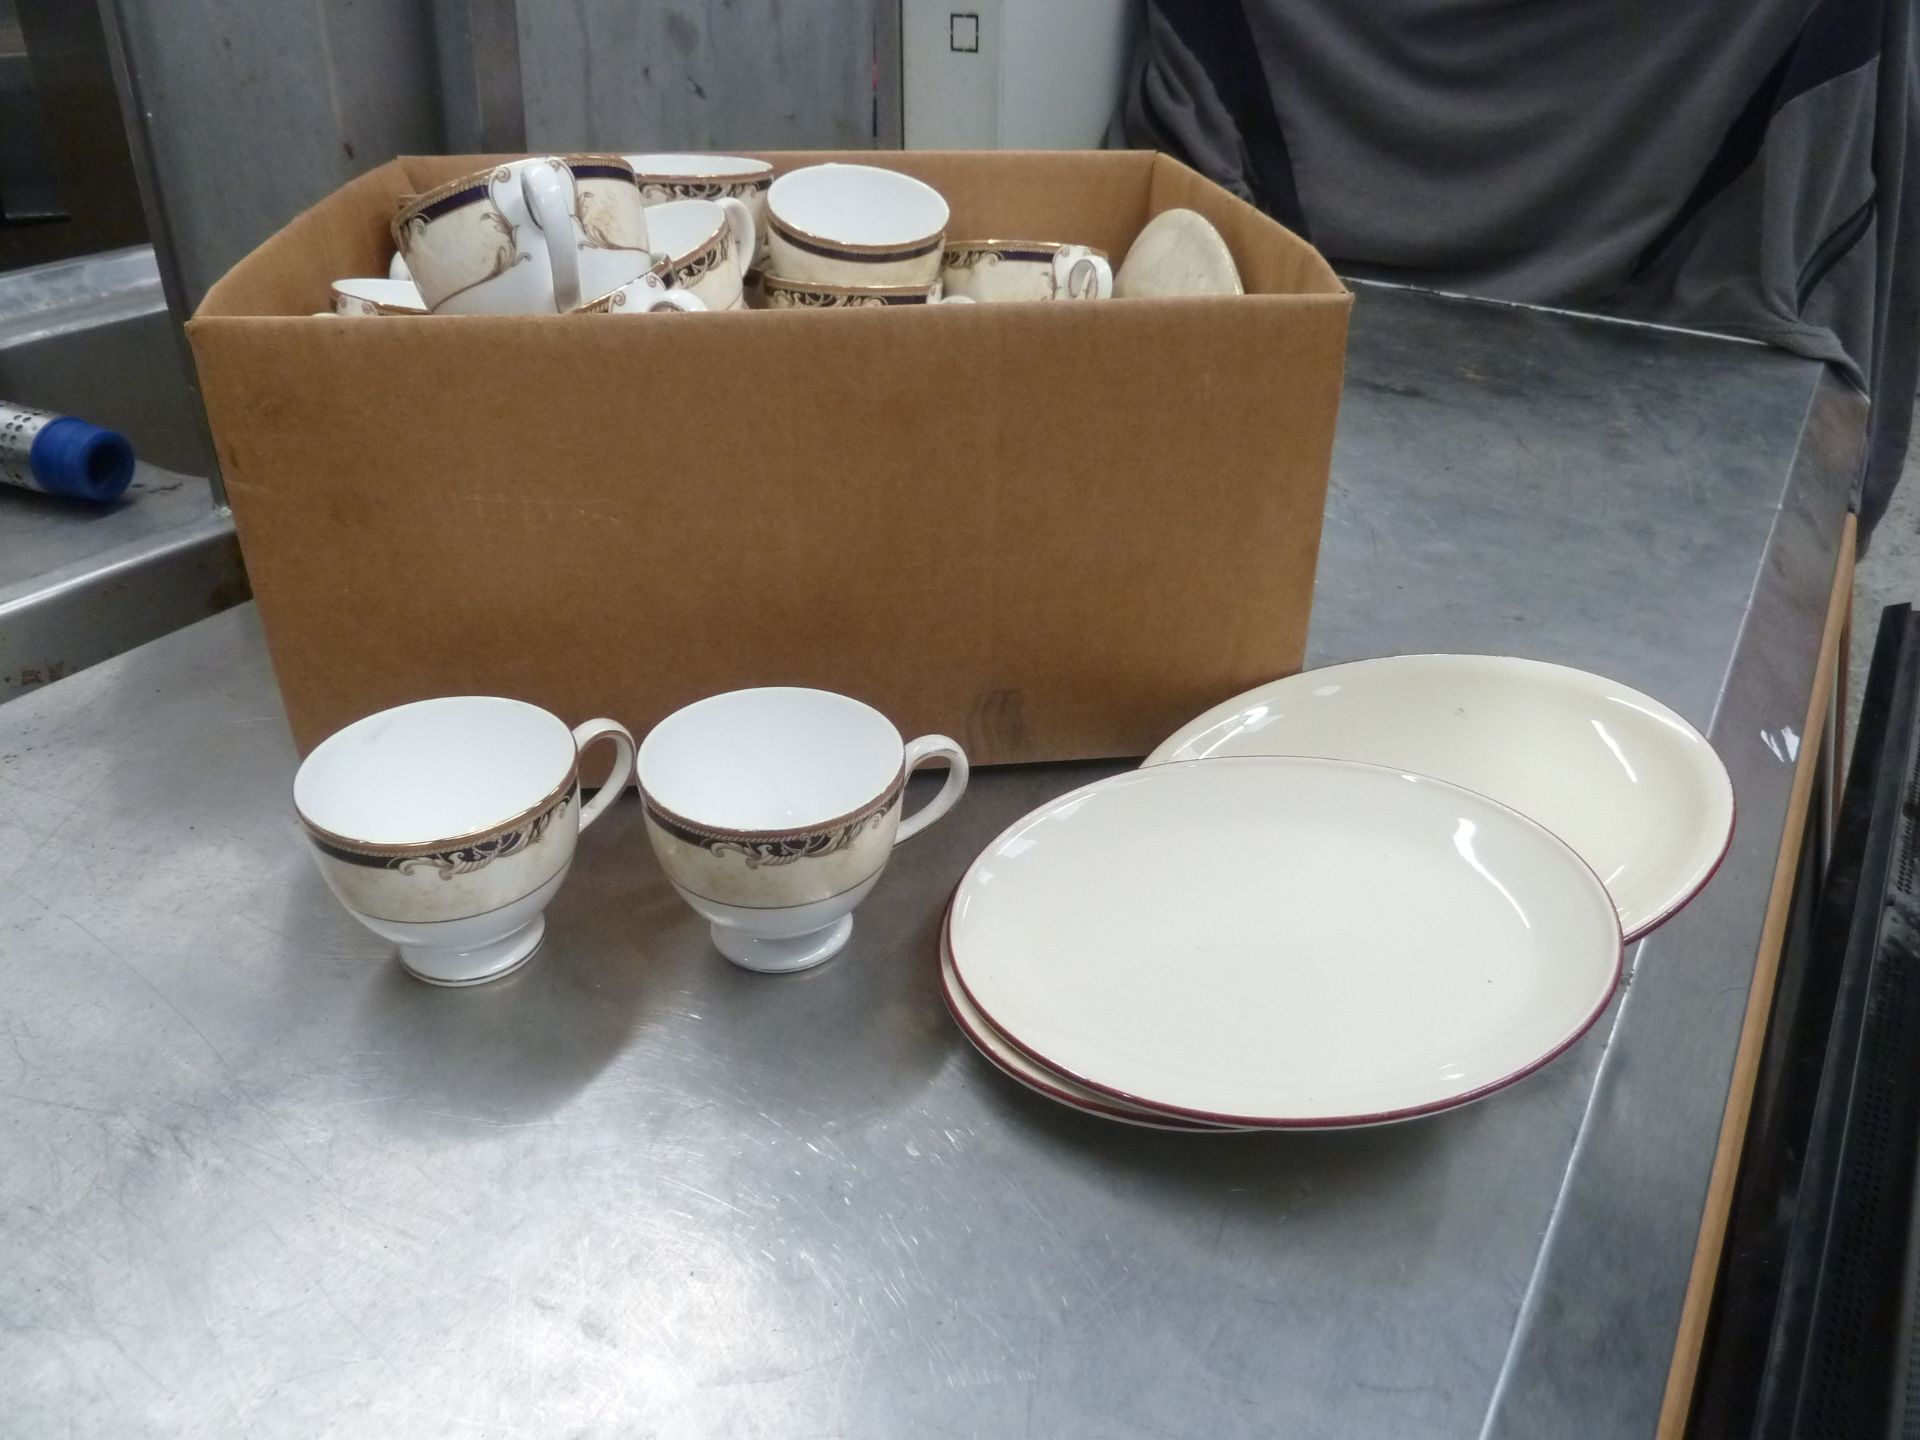 * china cups and oval plates - approx. 50 items